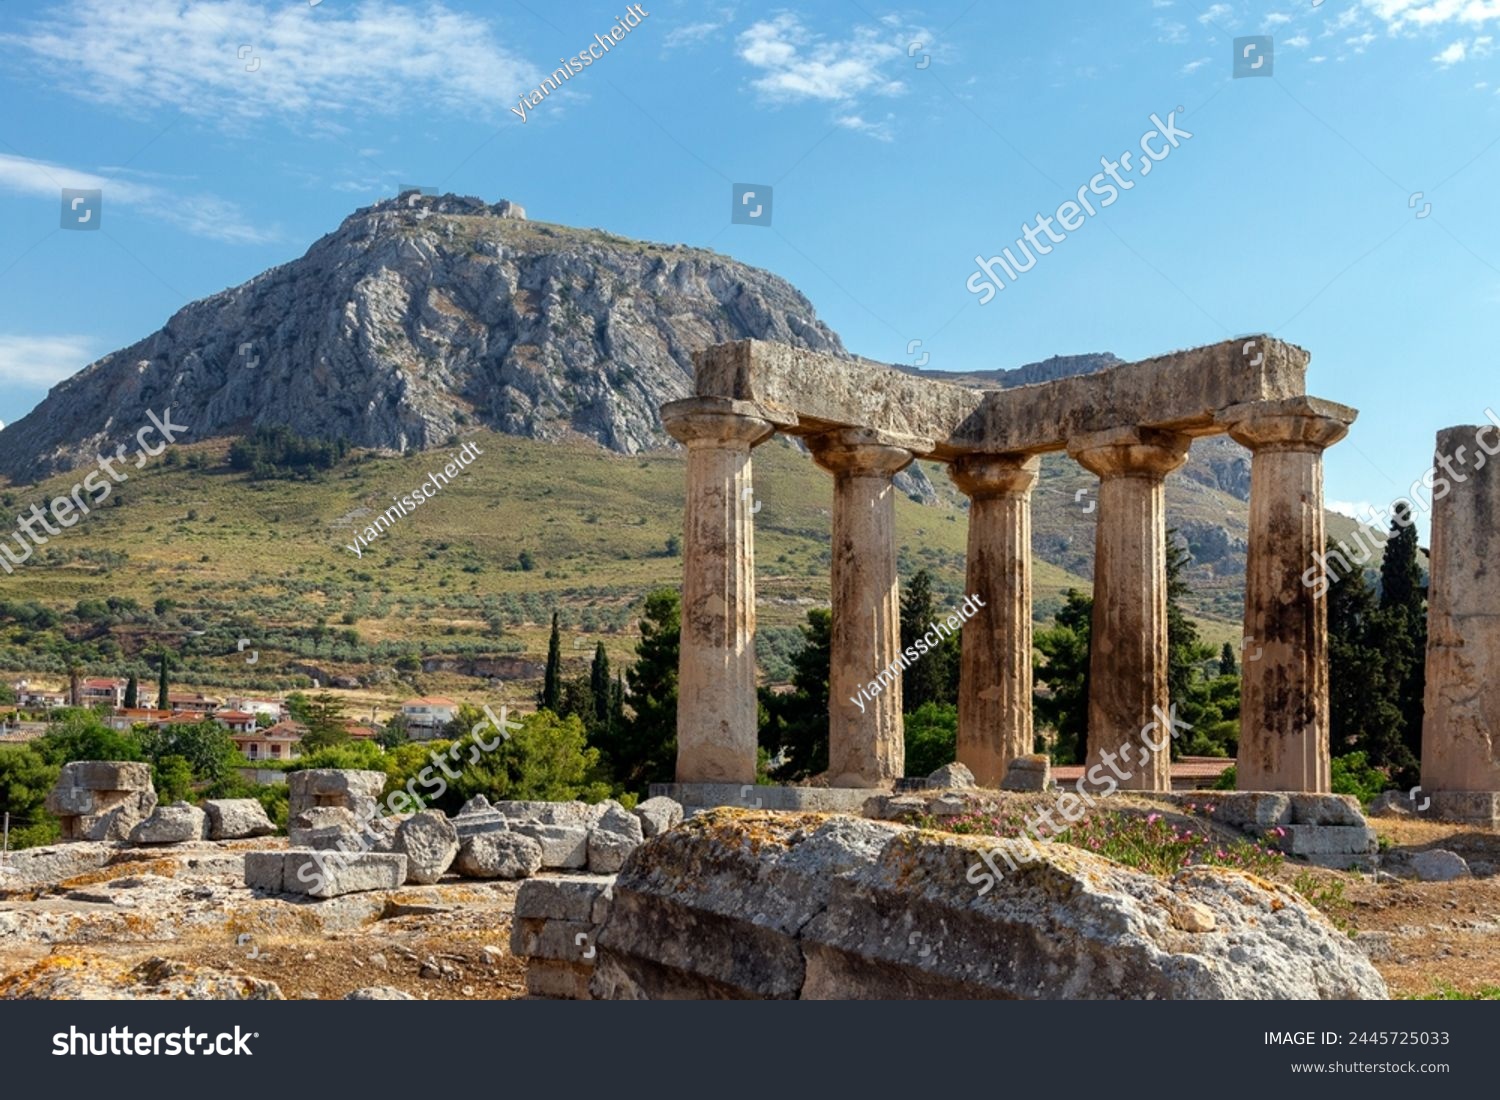 The archaic temple of Apollo, in ancient Corinth, Greece. It was built with monolithid doric columns, around 530 BC. #2445725033